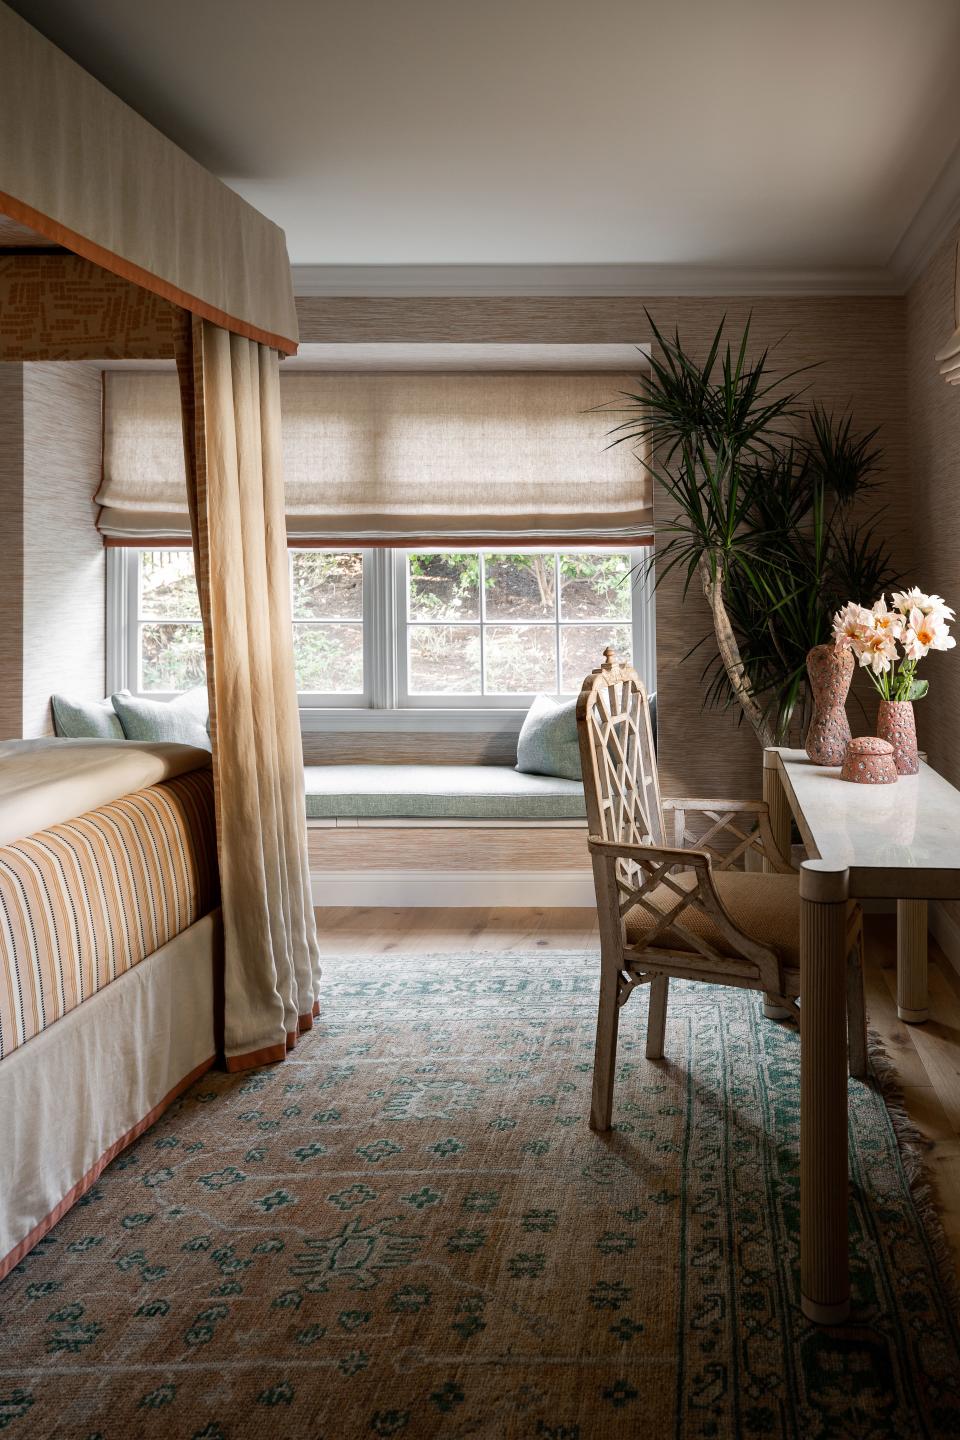 The clever approach to sourcing and styling is apparent here in the guest suite. A printed rug and four-poster bed adds a sense of depth and history, while simple window treatments and shapely furniture more typical of a Californian home keep things breezy.